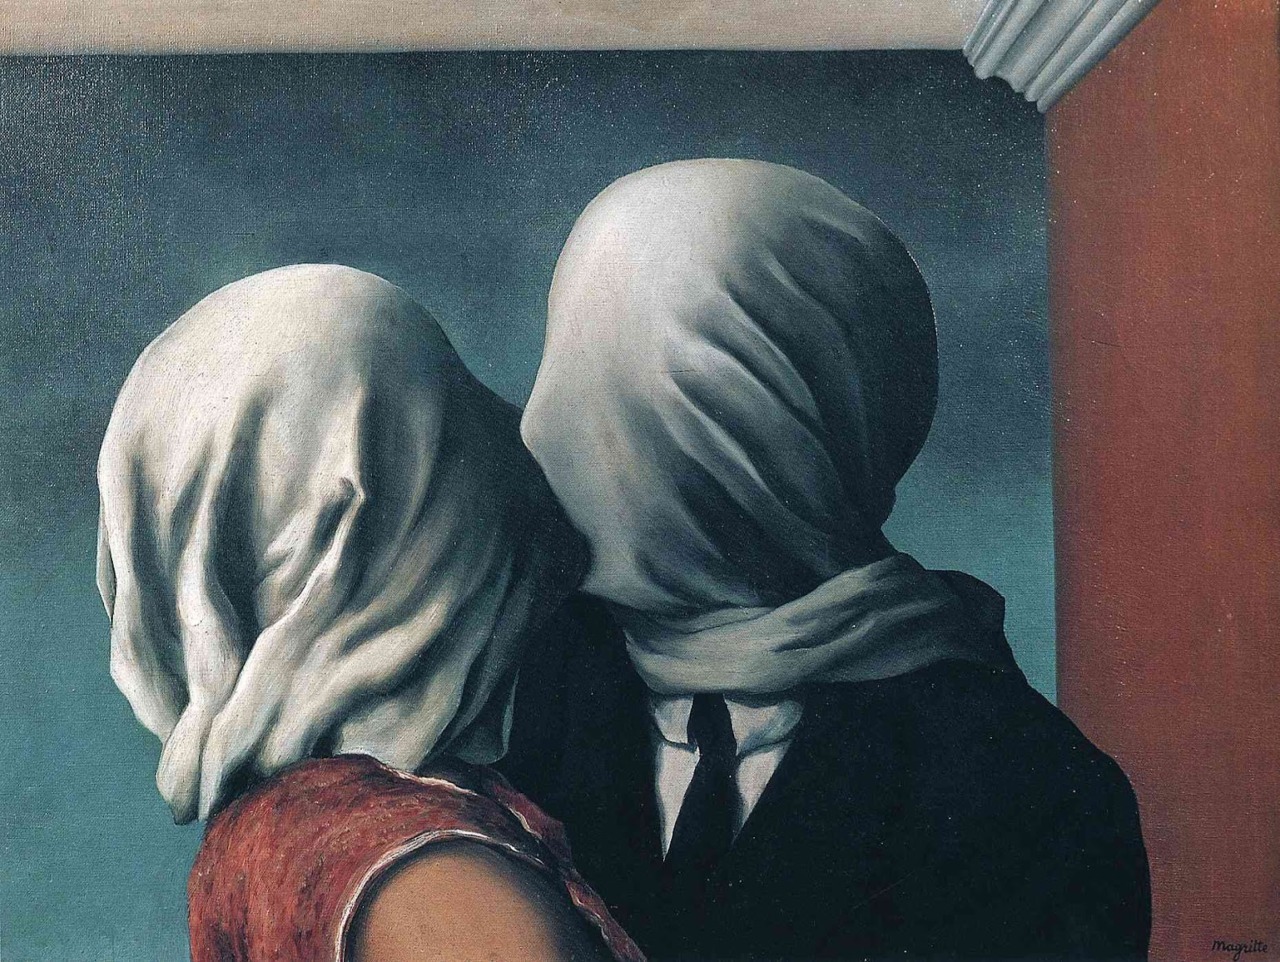 The Lovers
Rene Magritte, 1928
“ Magritte’s mother was a suicidal woman, which led her husband, Magritte’s father, to lock her up in her room. One day, she escaped, and was found down a nearby river dead, having drowned herself. According to legend,...